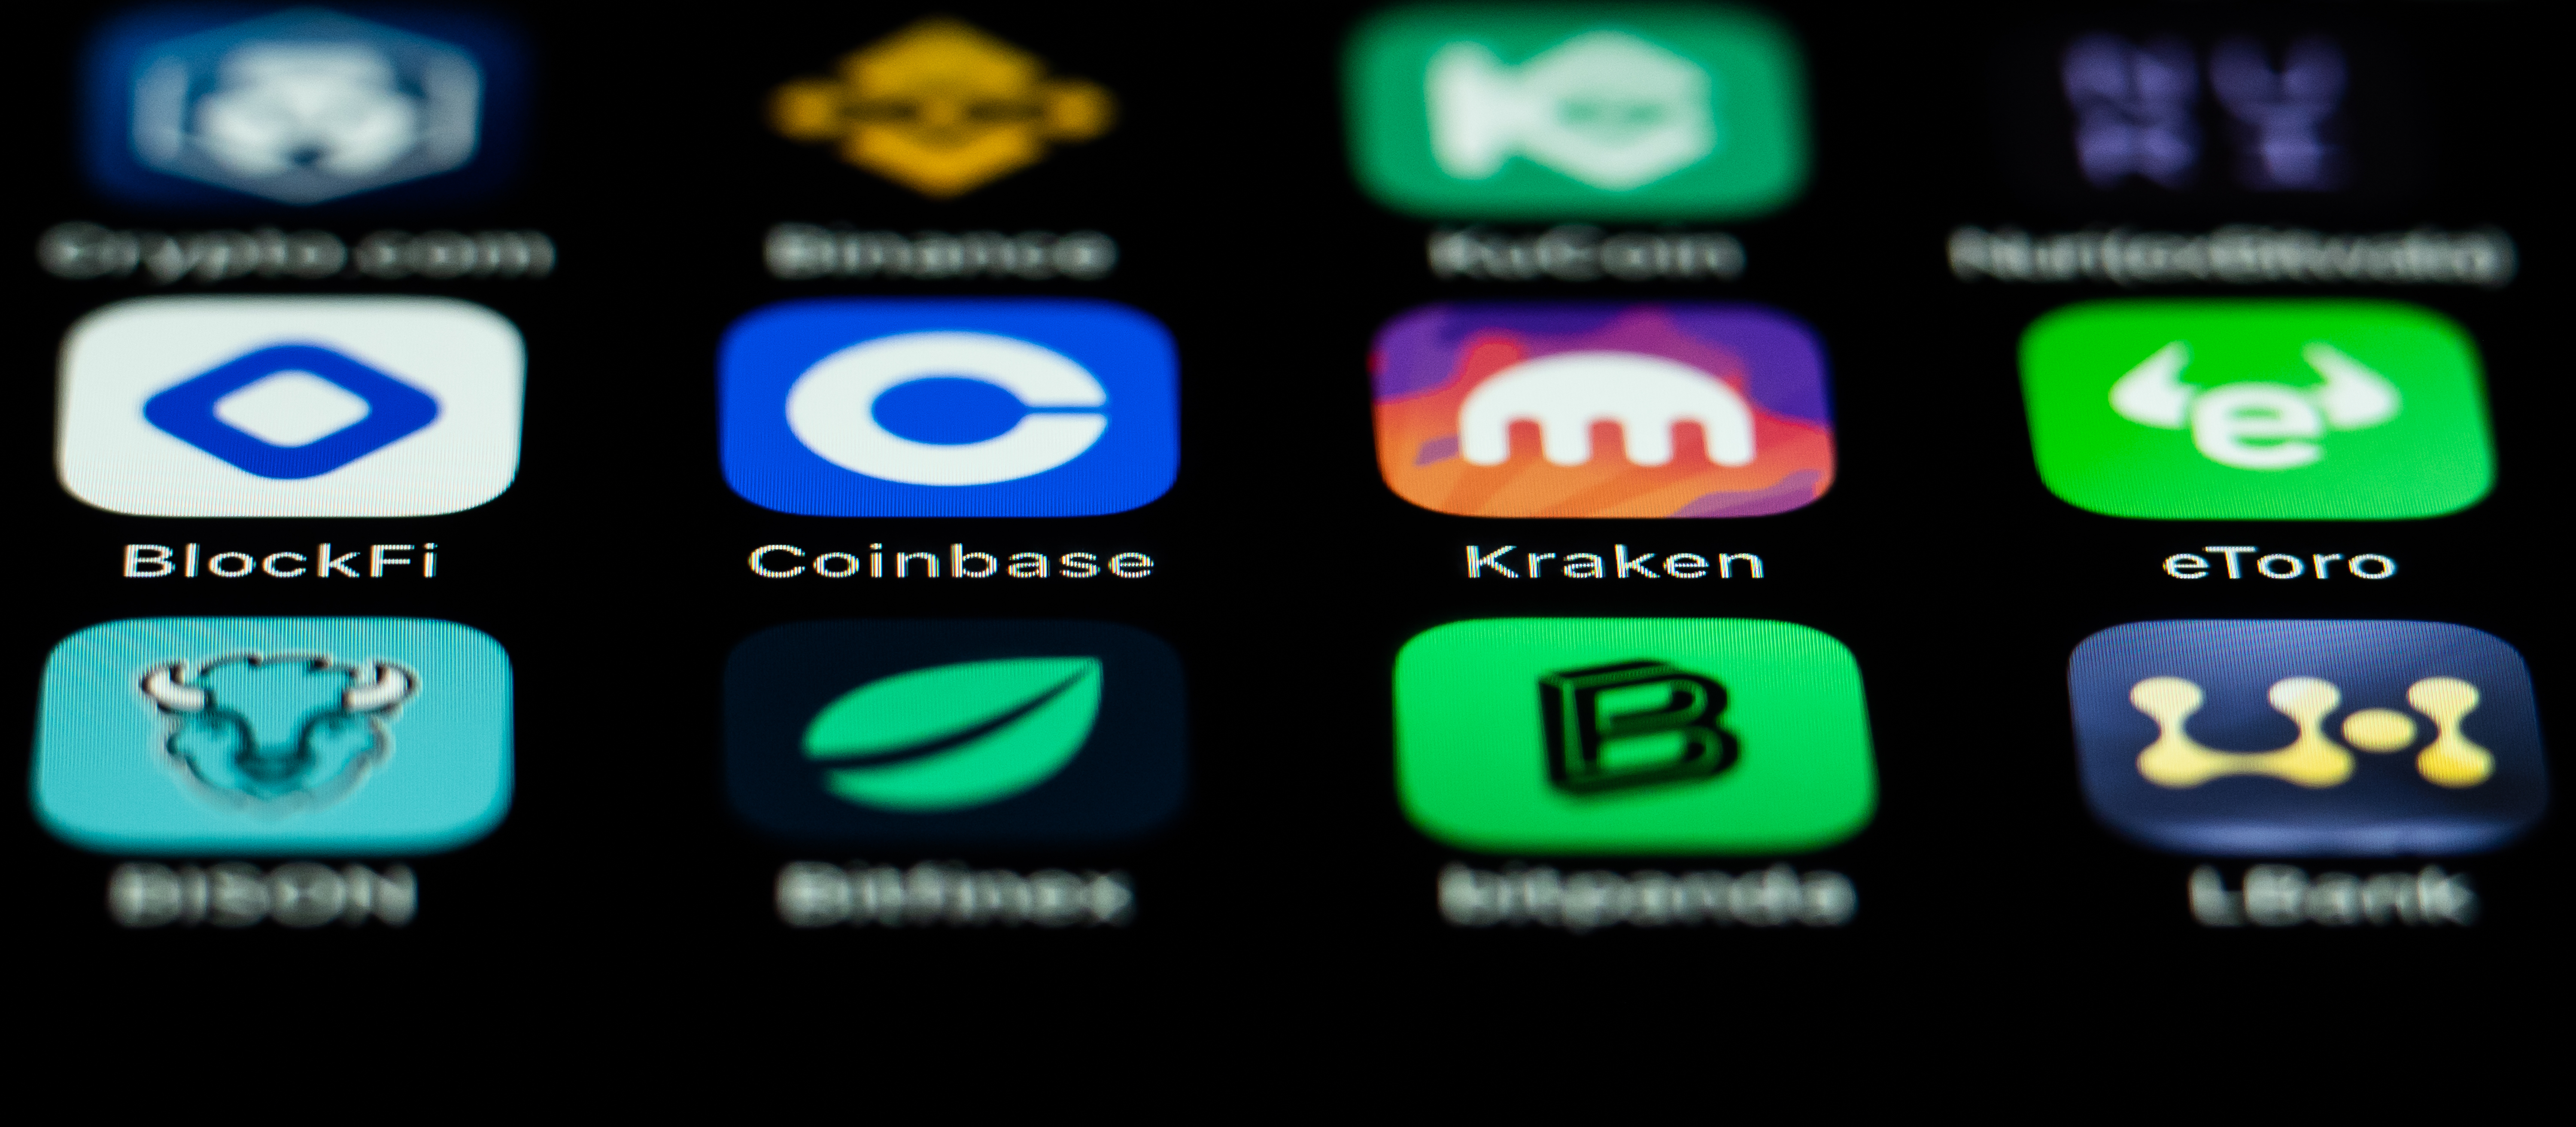 A phone screen showing app icons for cryptocurrency companies.